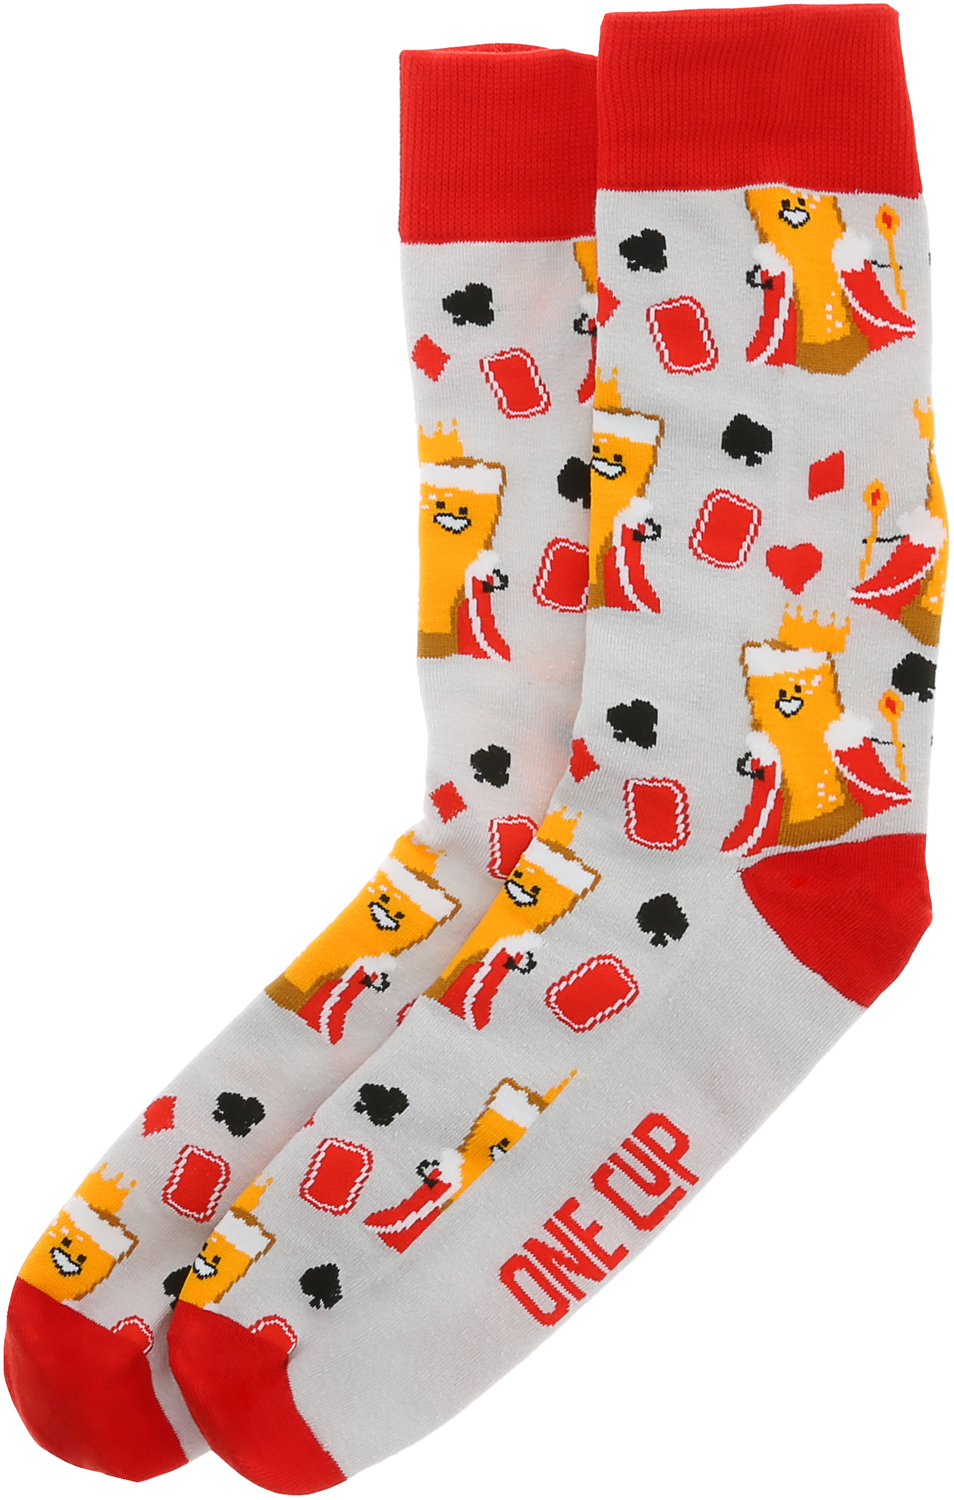 King's Cup by Late Night Last Call - King's Cup - M/L Unisex Socks